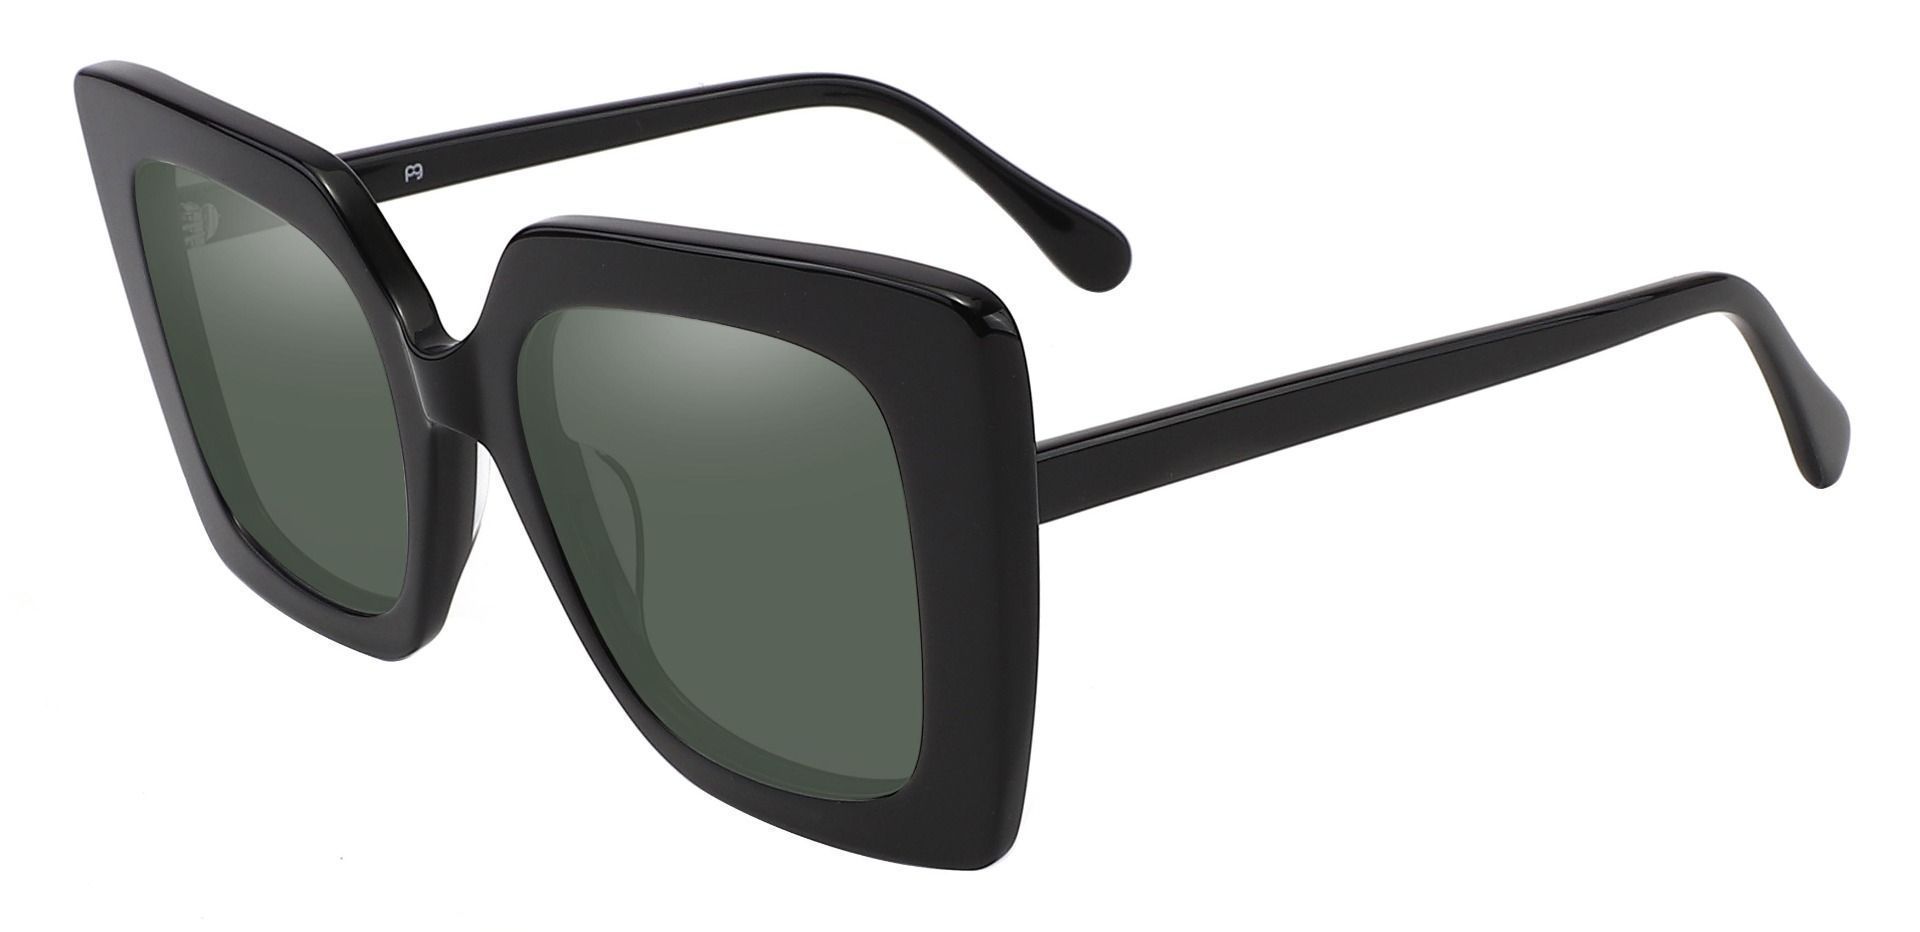 Rowland Square Reading Sunglasses - Black Frame With Green Lenses